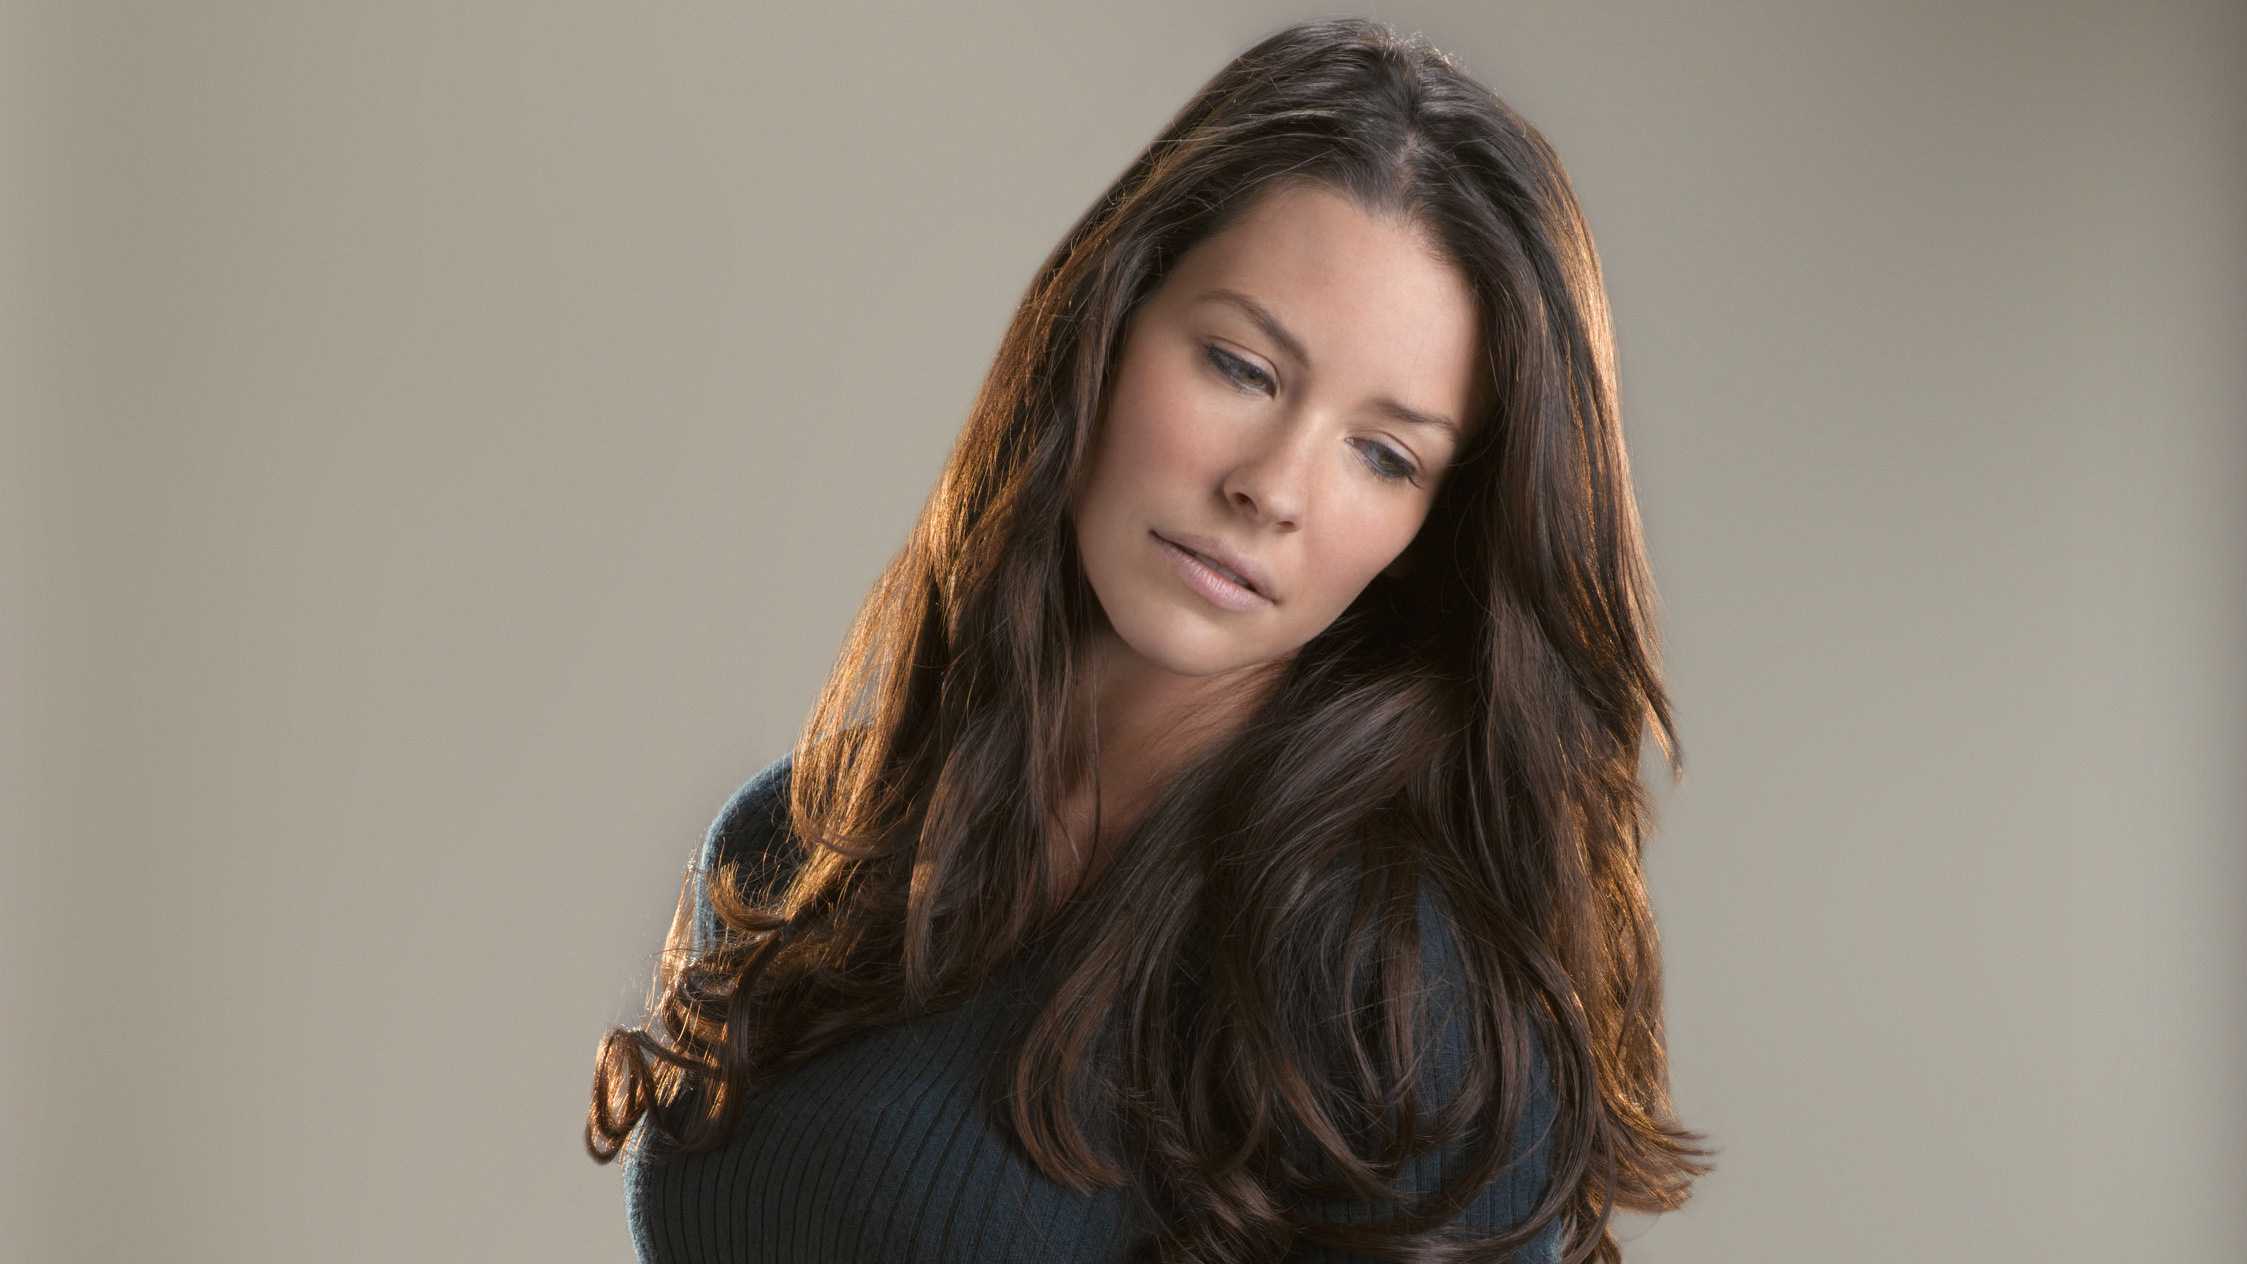 'Some people value freedom over their lives': Evangeline Lilly’s coronavirus controversy